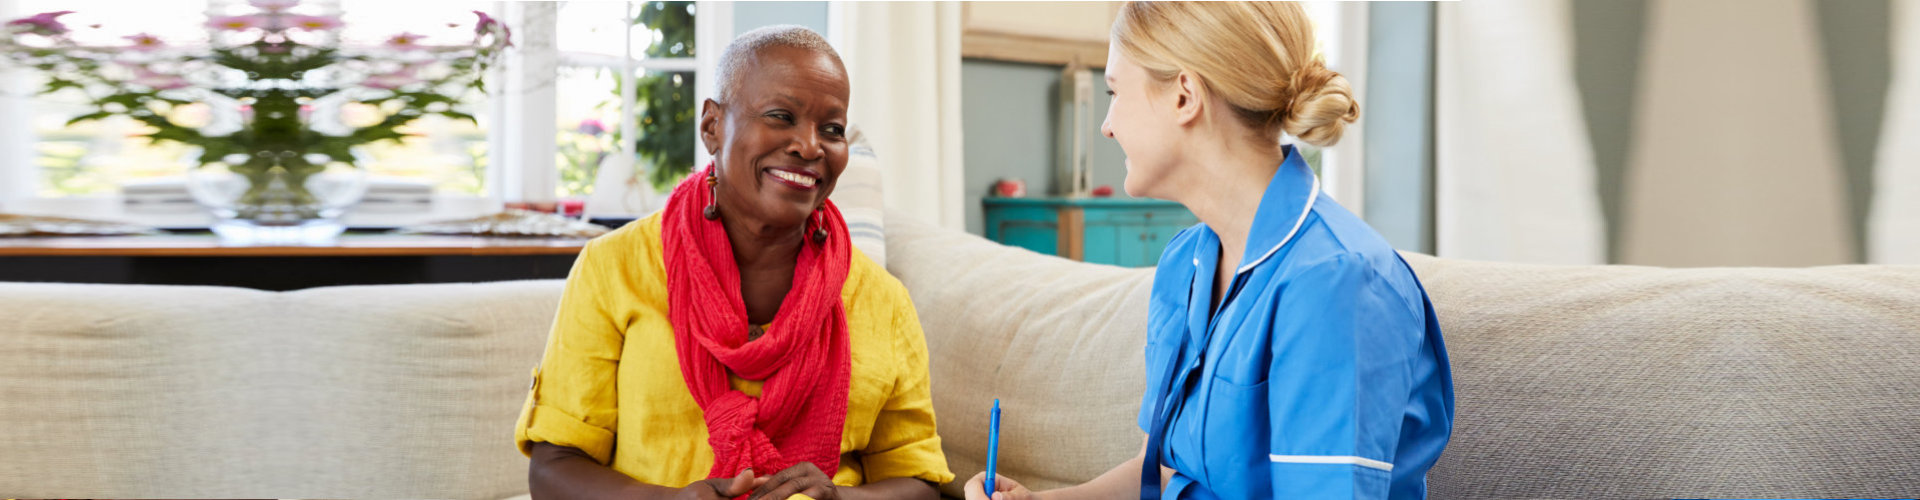 caregiver having a conversation with the senior woman smiling